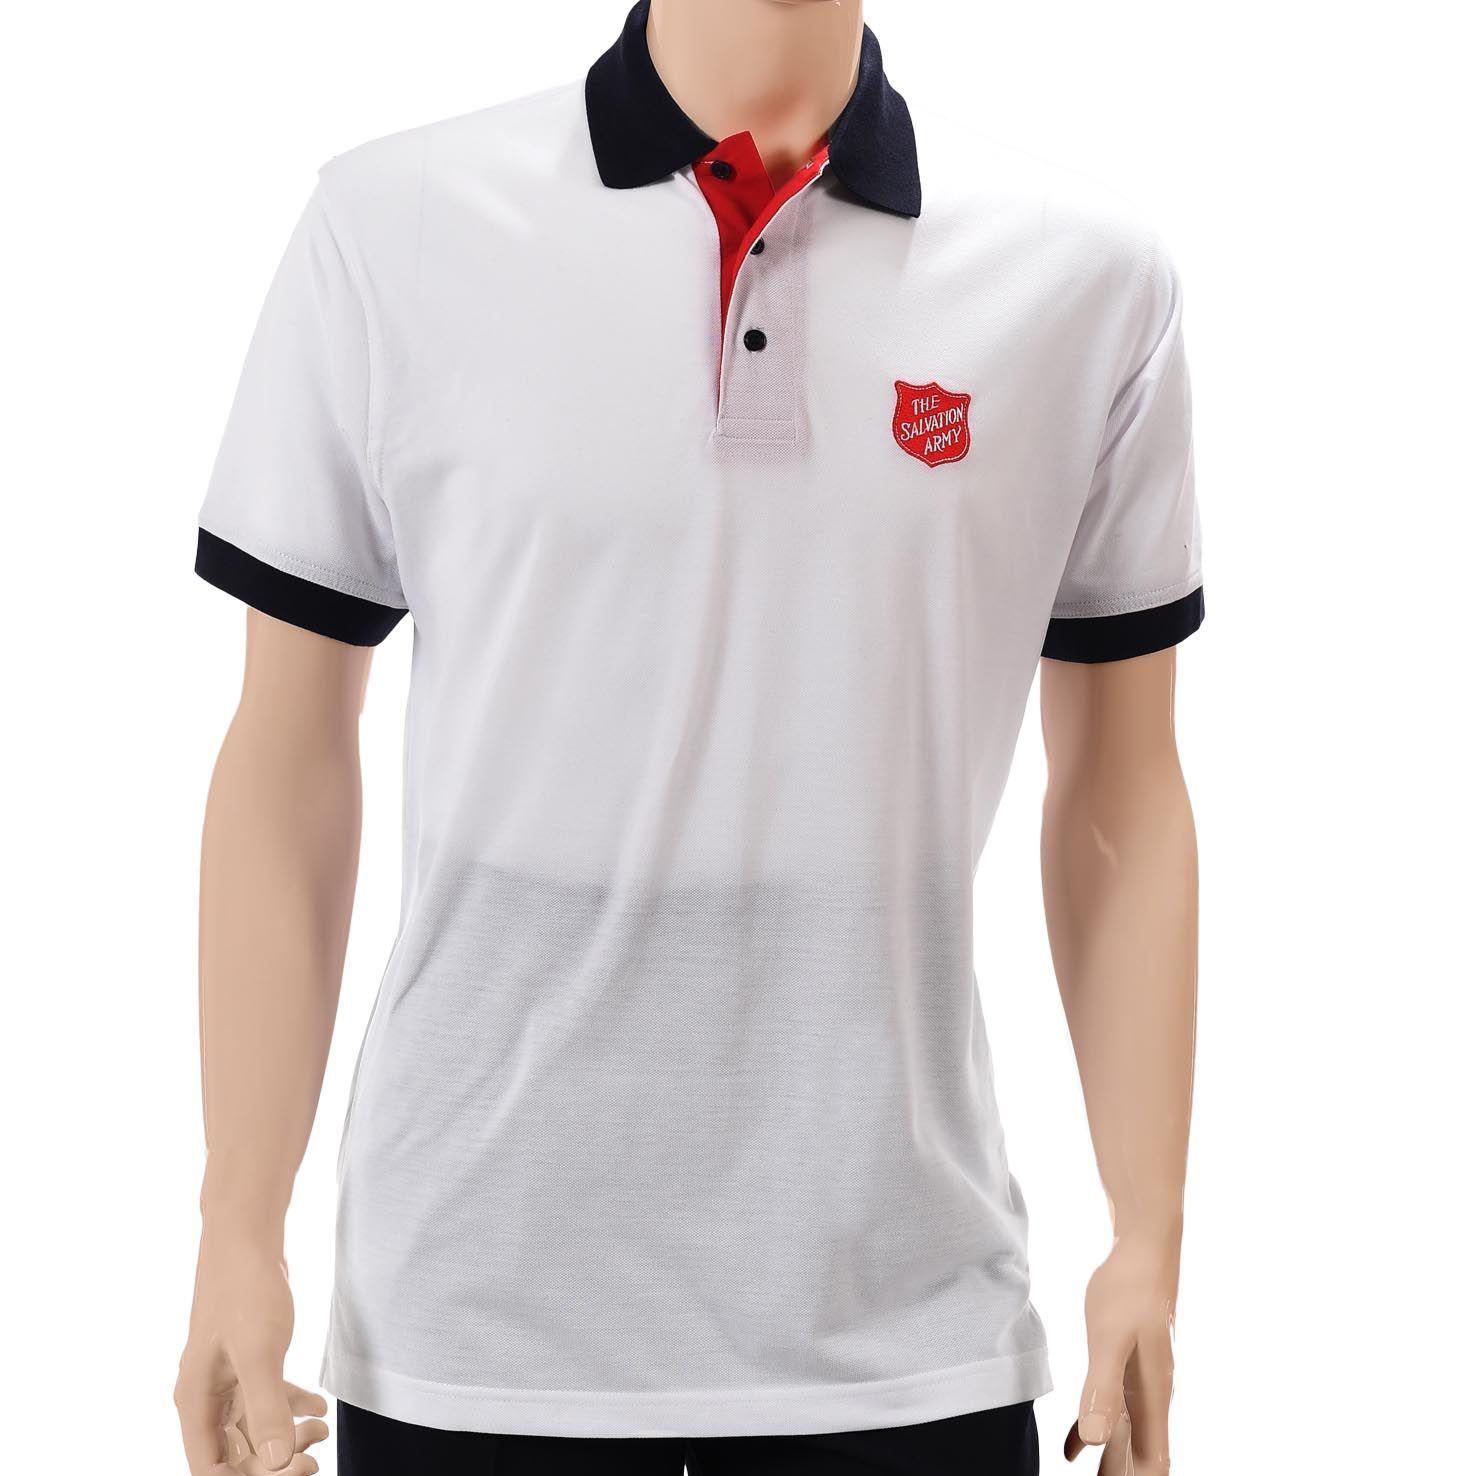 White and Red Shield Logo - Unisex Polo Shirt White Contrast with Red Shield Logo